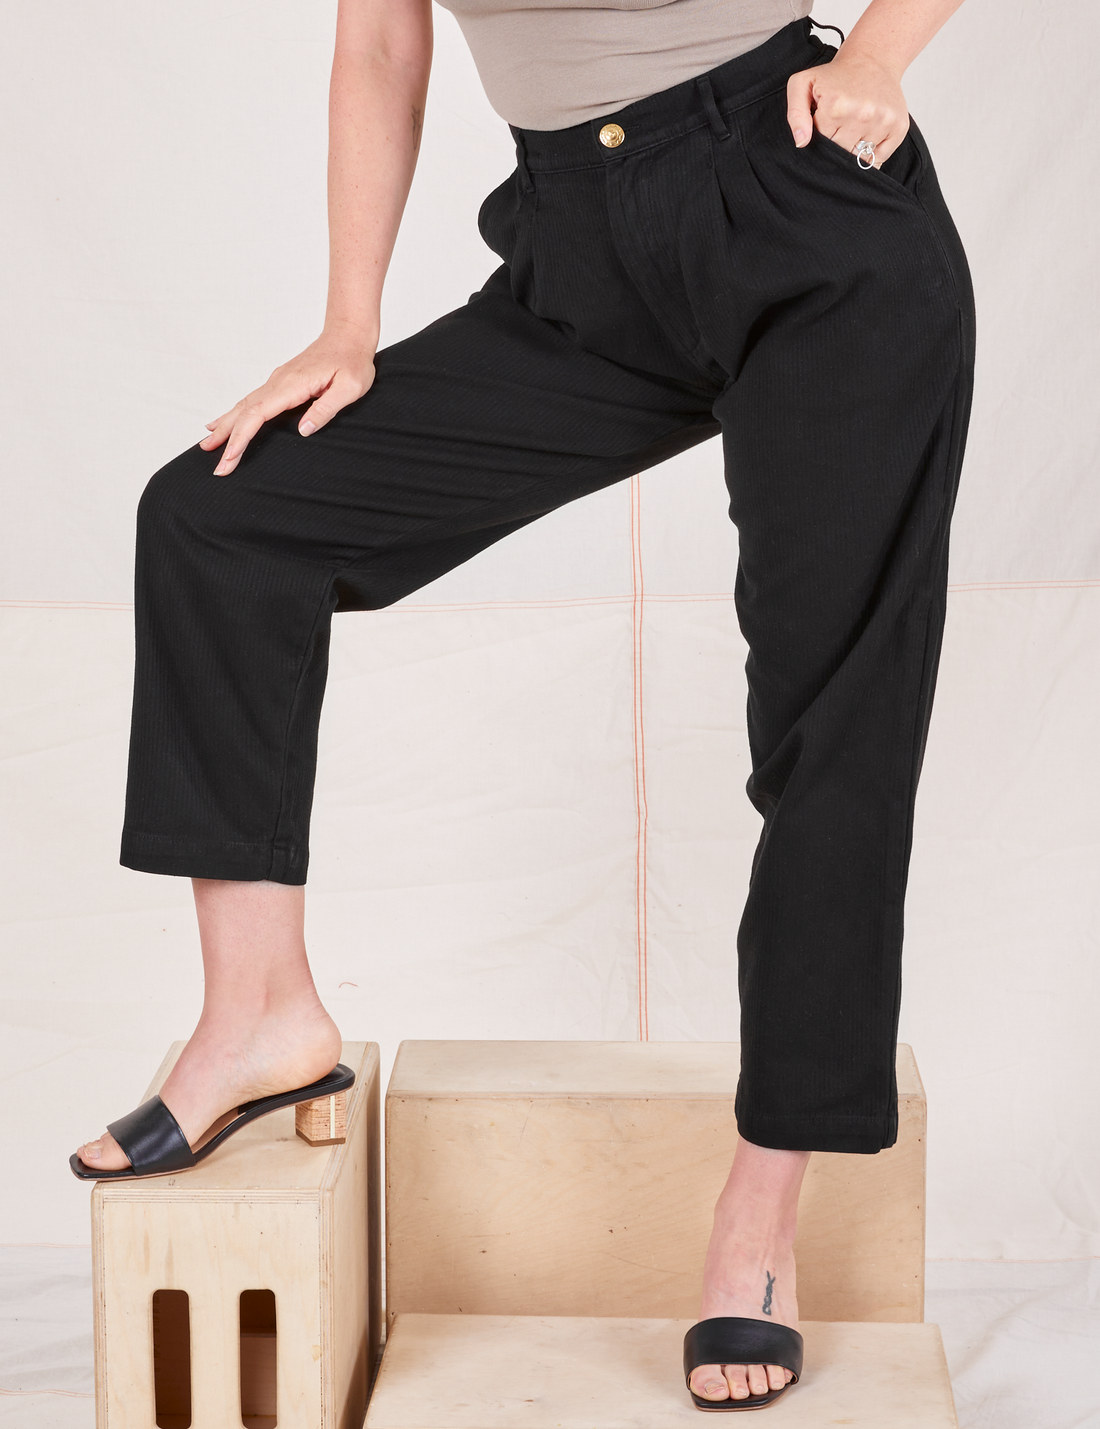 Heritage Trousers in Basic Black worn by Allison